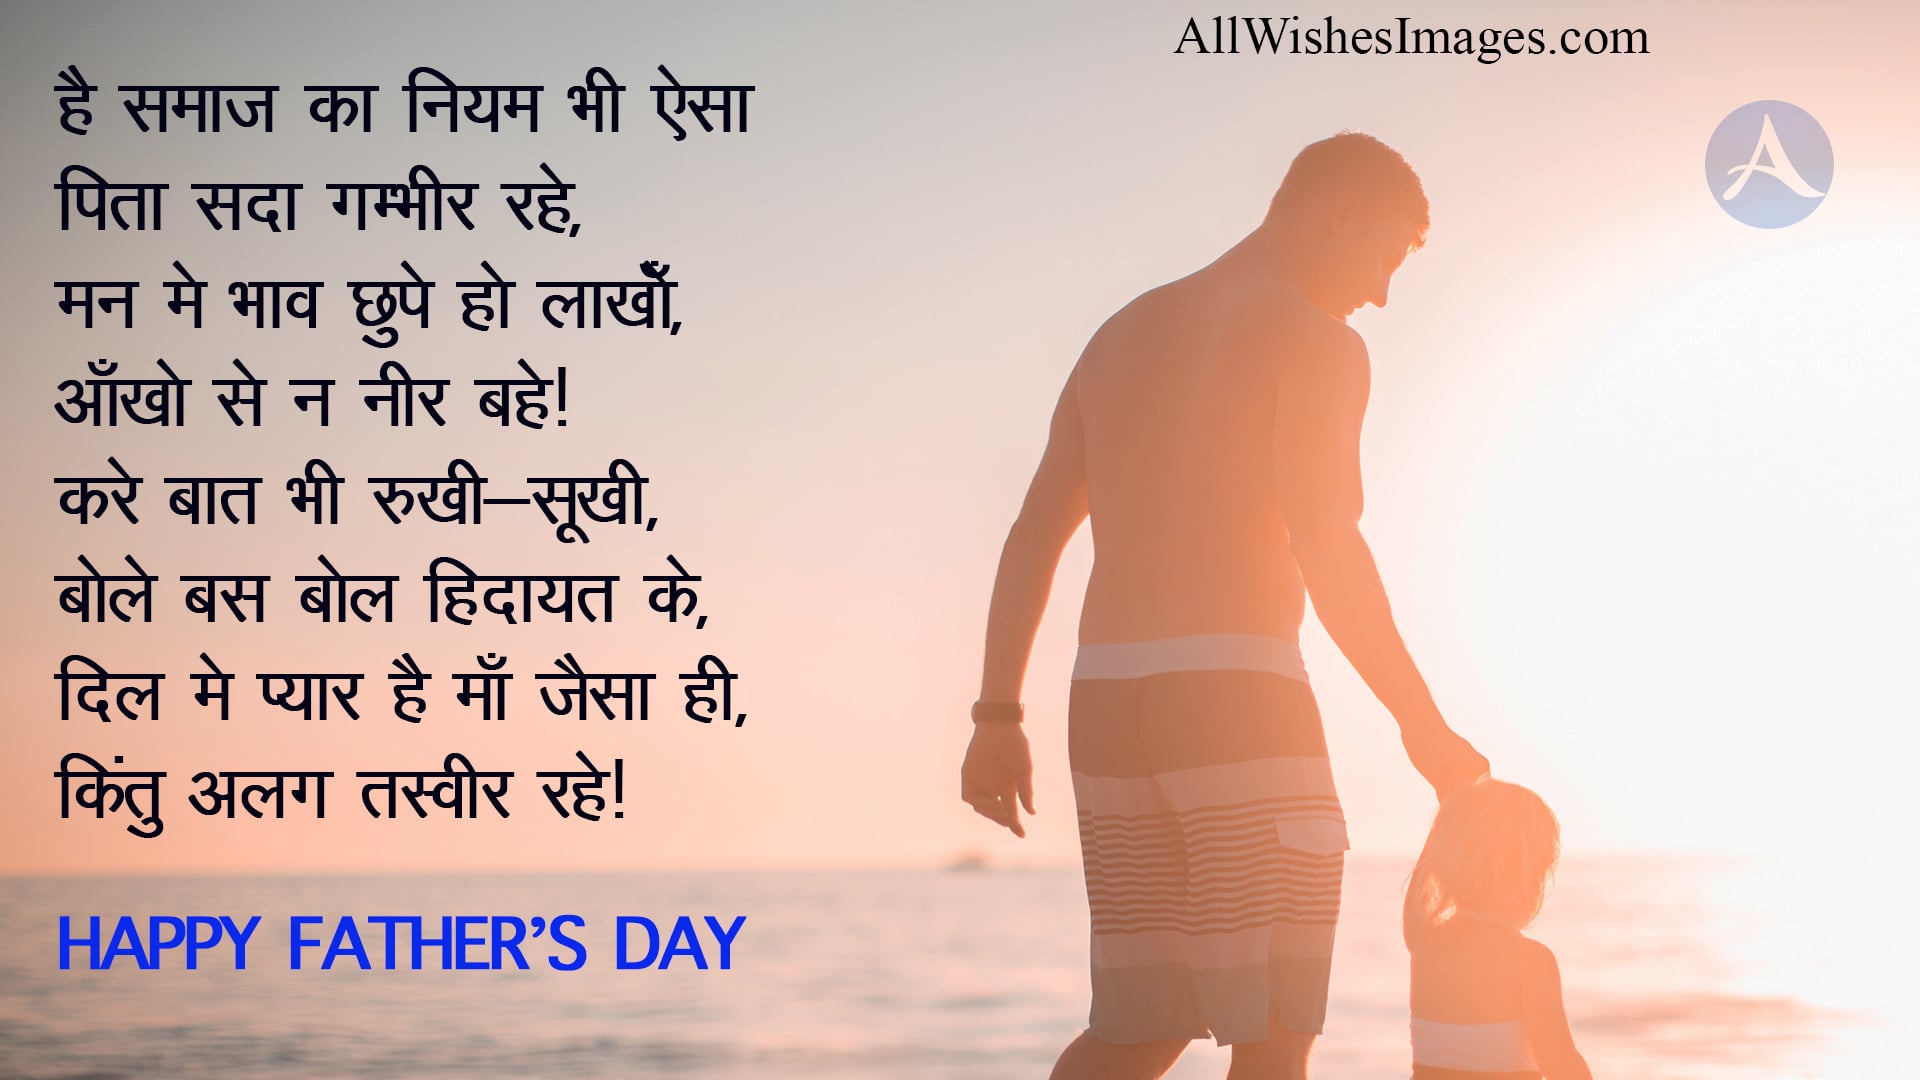 father's day images hd - All Wishes Images - Images for WhatsApp